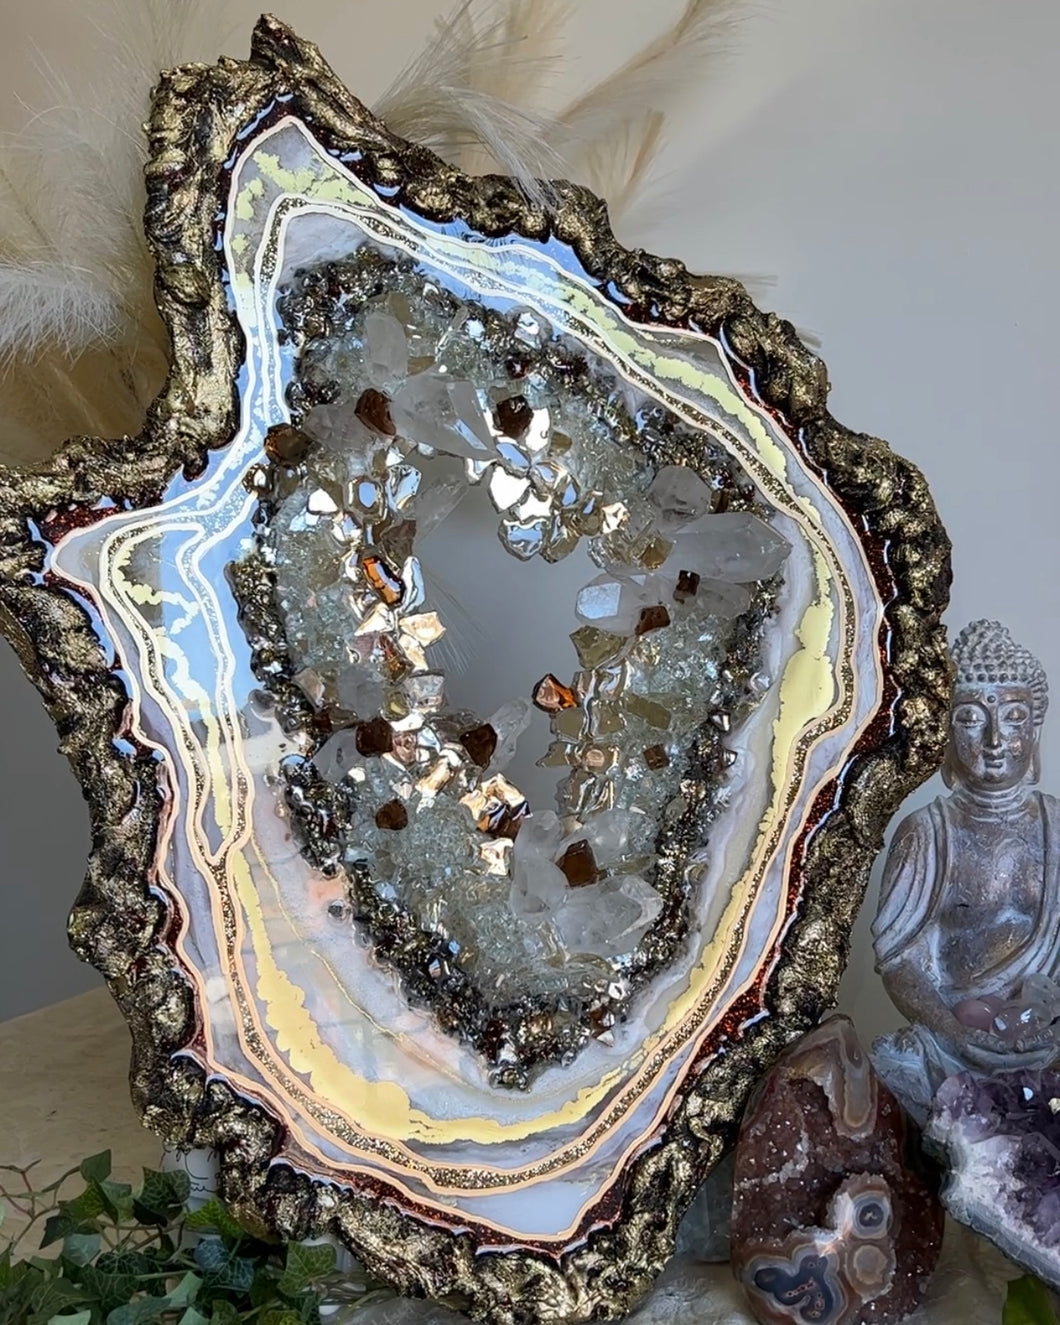 Neutral Colored Geode Slice With Genuine Crystal Quartz